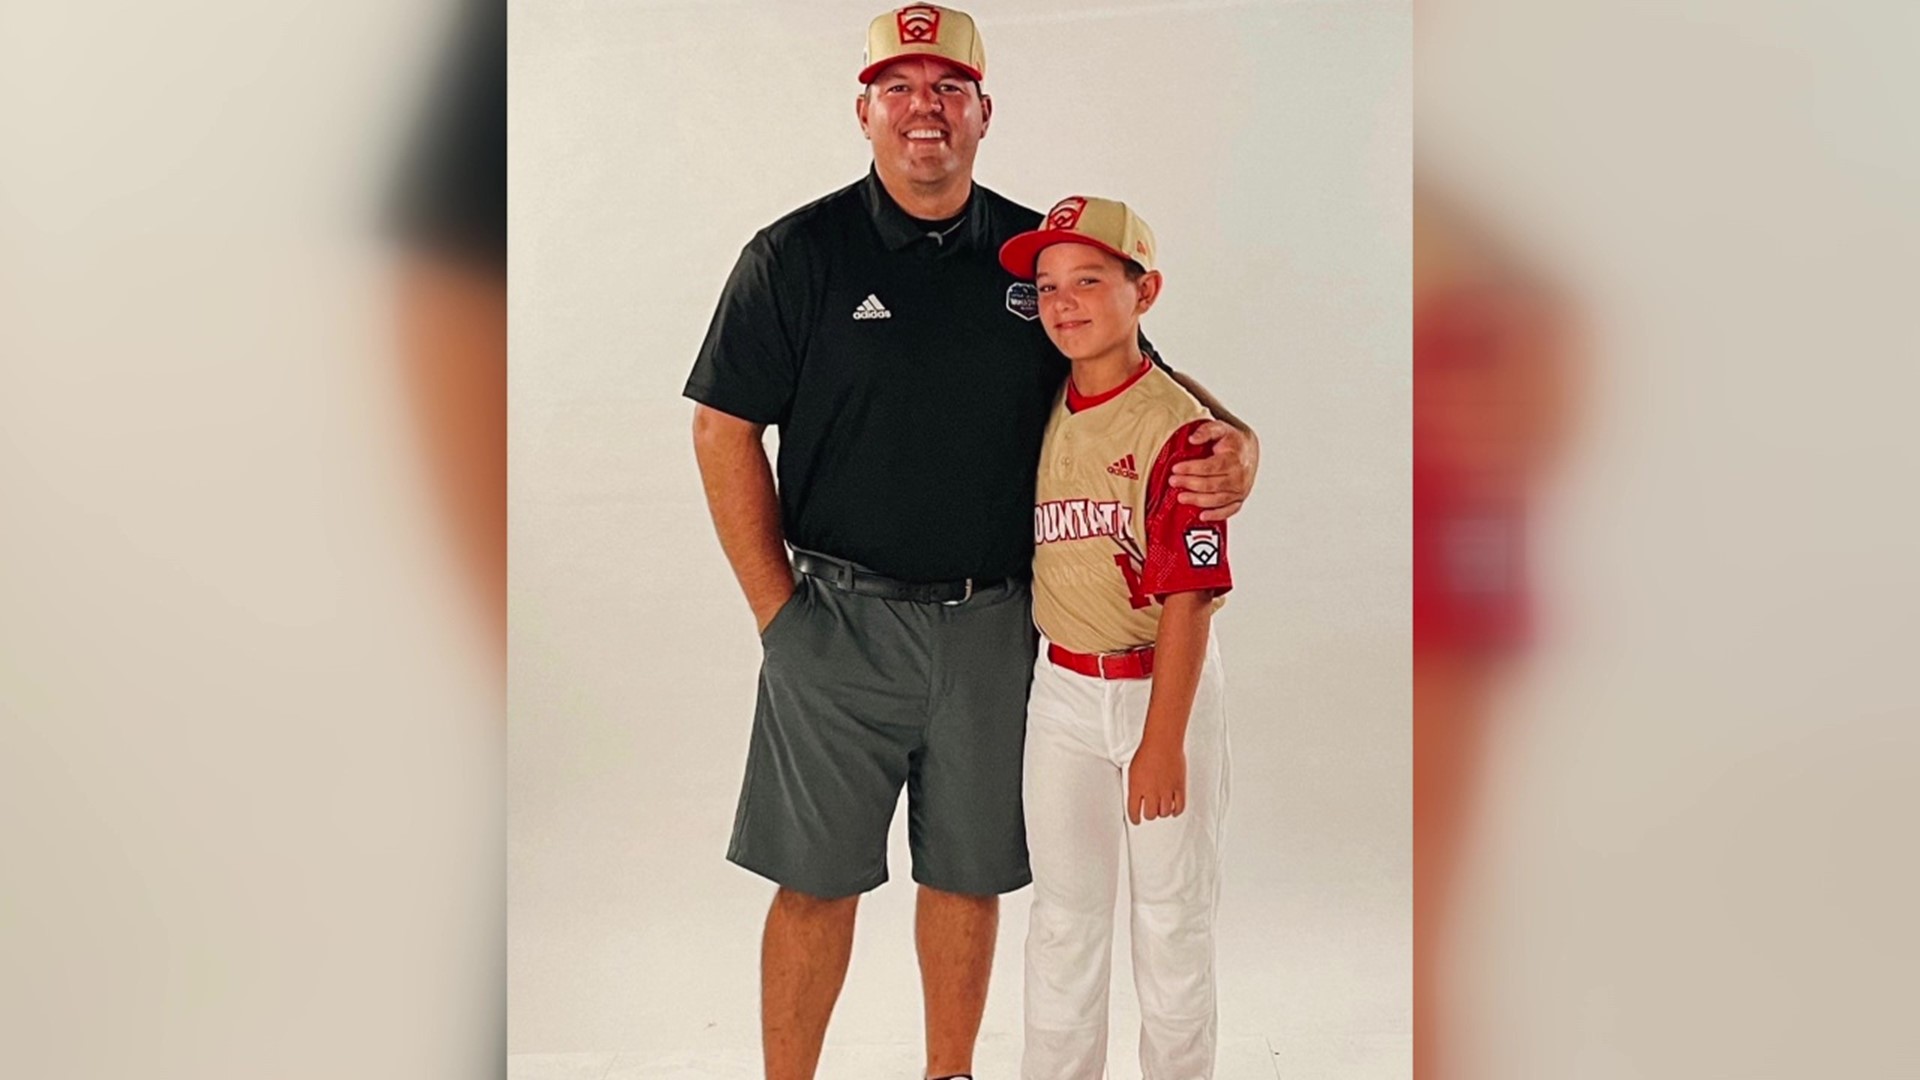 A law firm based in Philadelphia is representing Easton Oliverson, who suffered brain damage after he fell off a bunk at last month's Little League World Series.